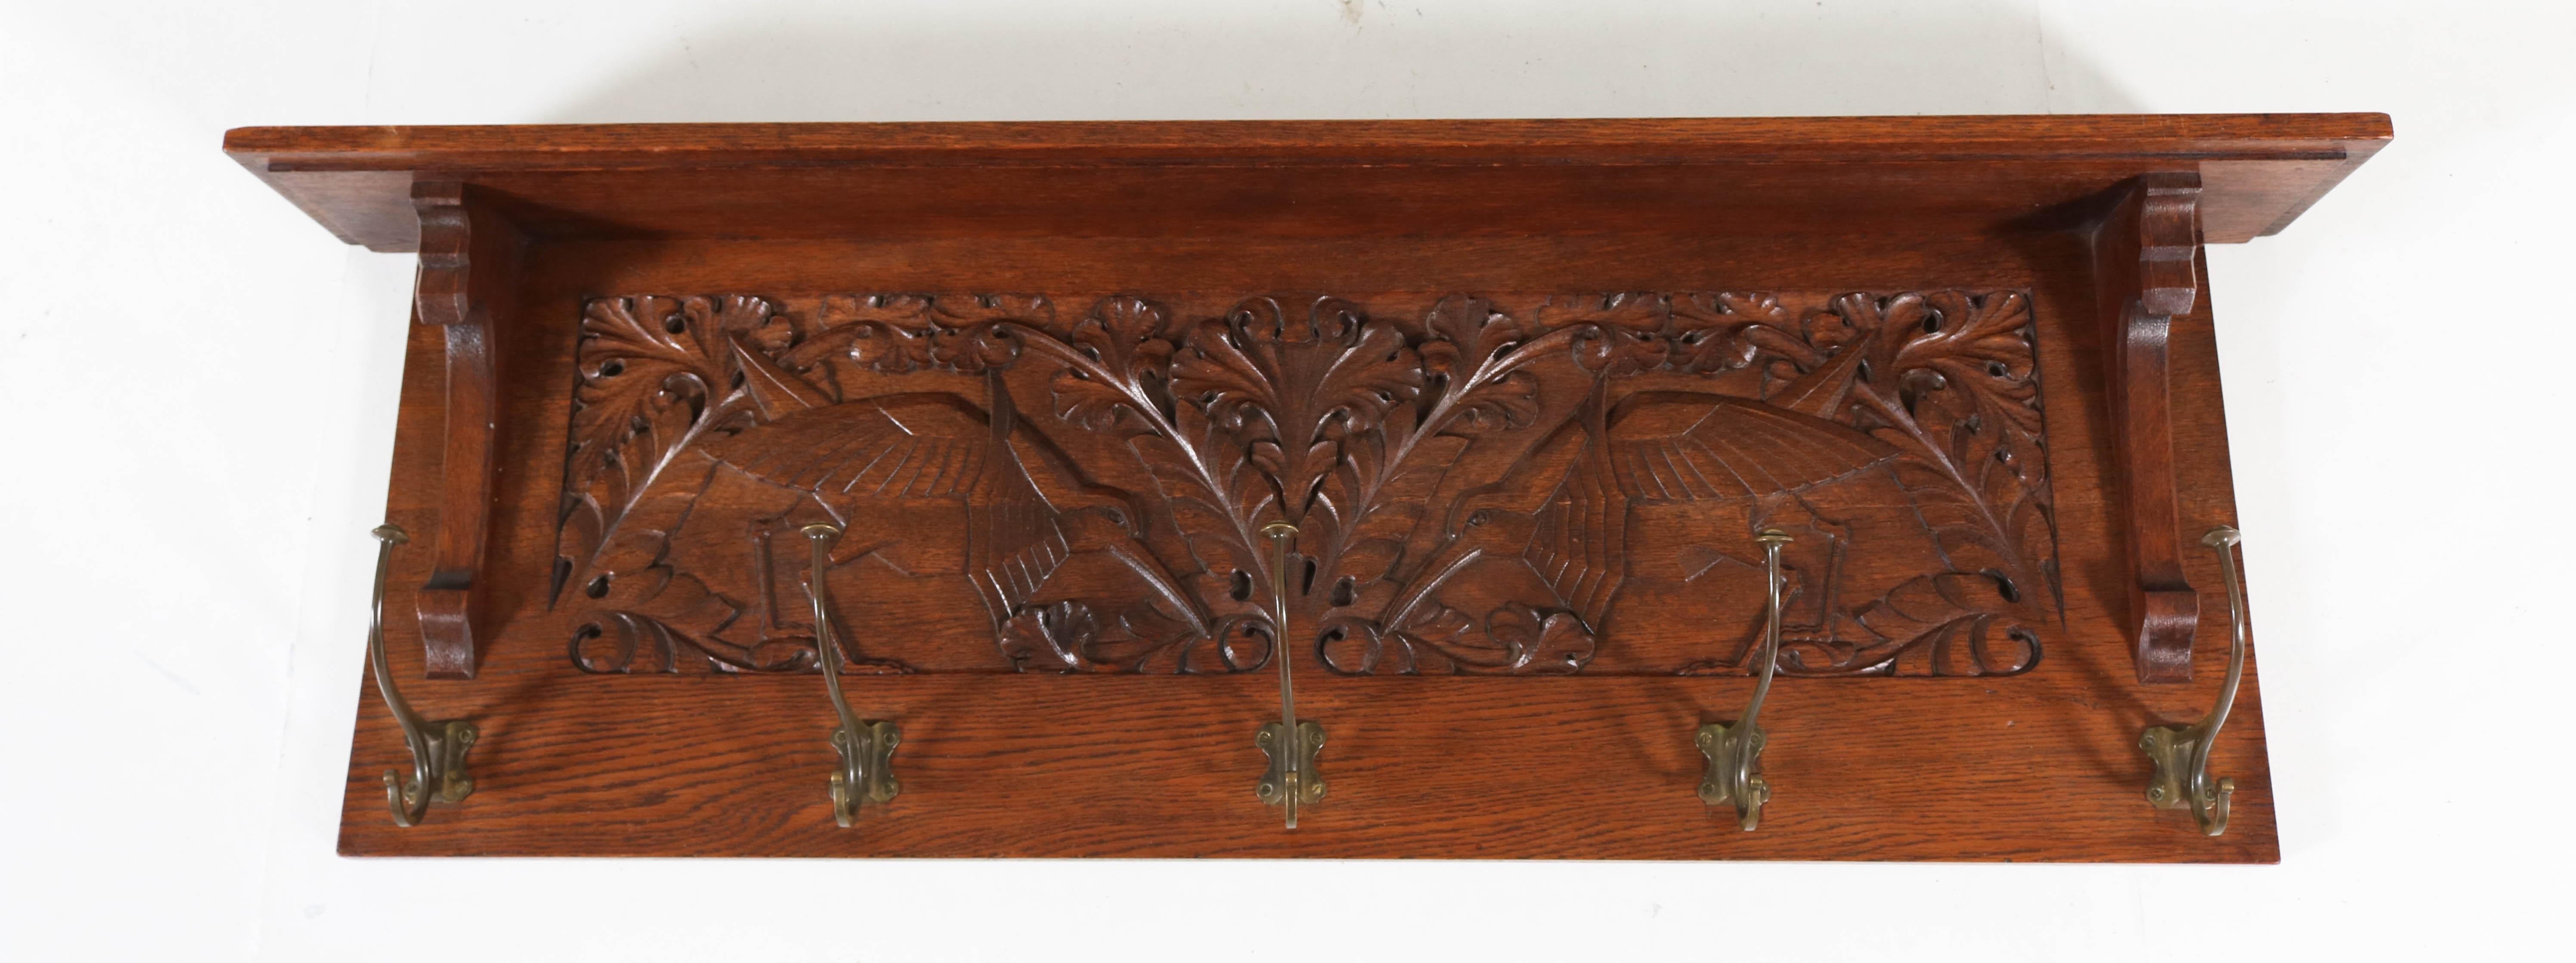 Stylish and rare Art Nouveau Arts & Crafts coat rack.
Striking Dutch design from the 1900s.
Magnificent hand carved birds.
Solid oak with five original brass hooks.
In good original condition with minor wear consistent with age and